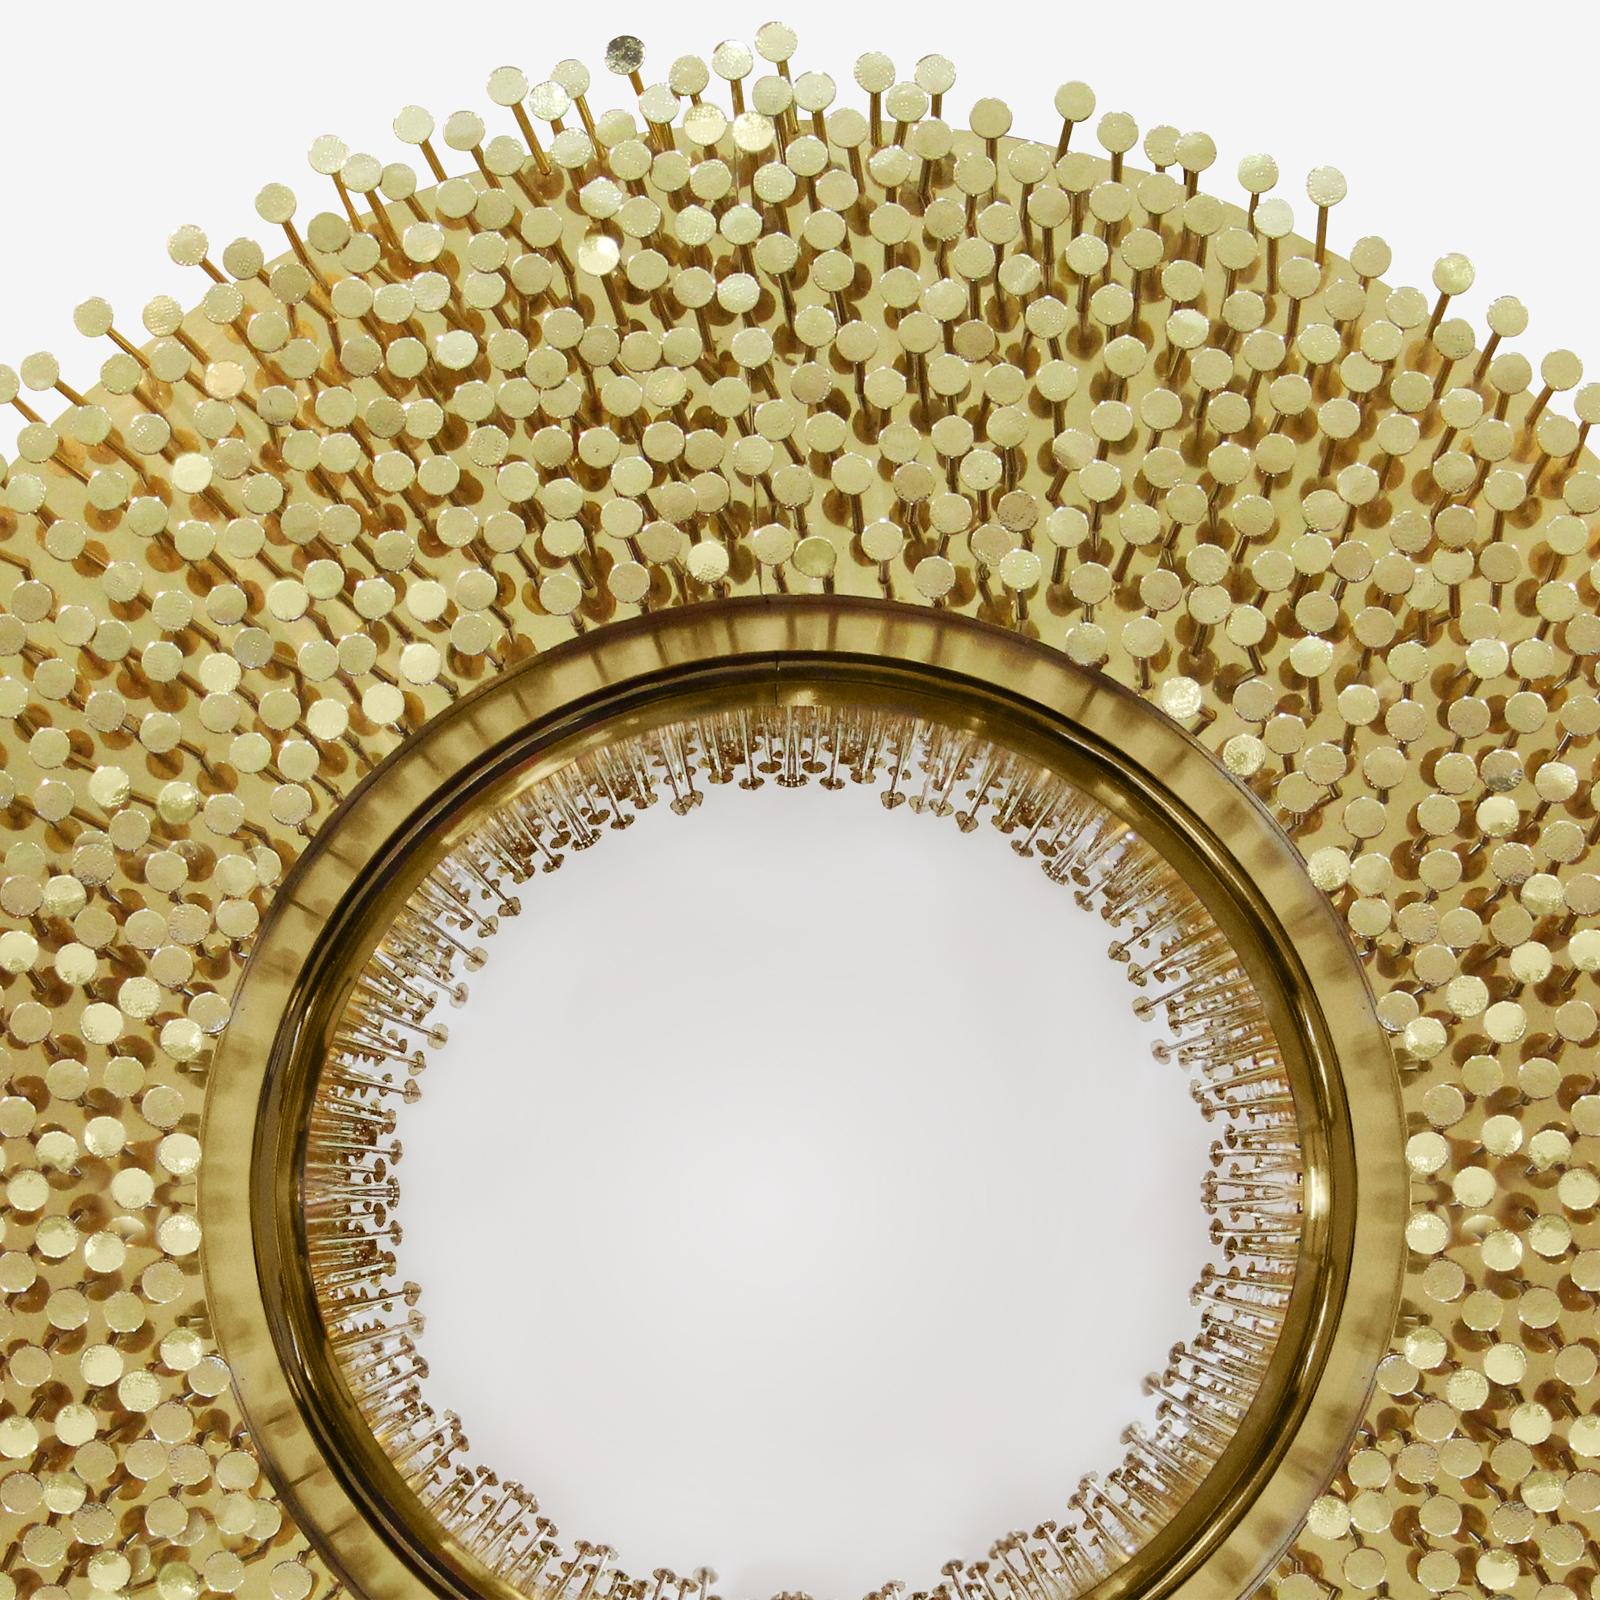 Mirror Roundy with solid brass, fish-eye mirror with handmade
nails. Each mirror is unique in their finishing. Subtle piece in
limited edition.
 